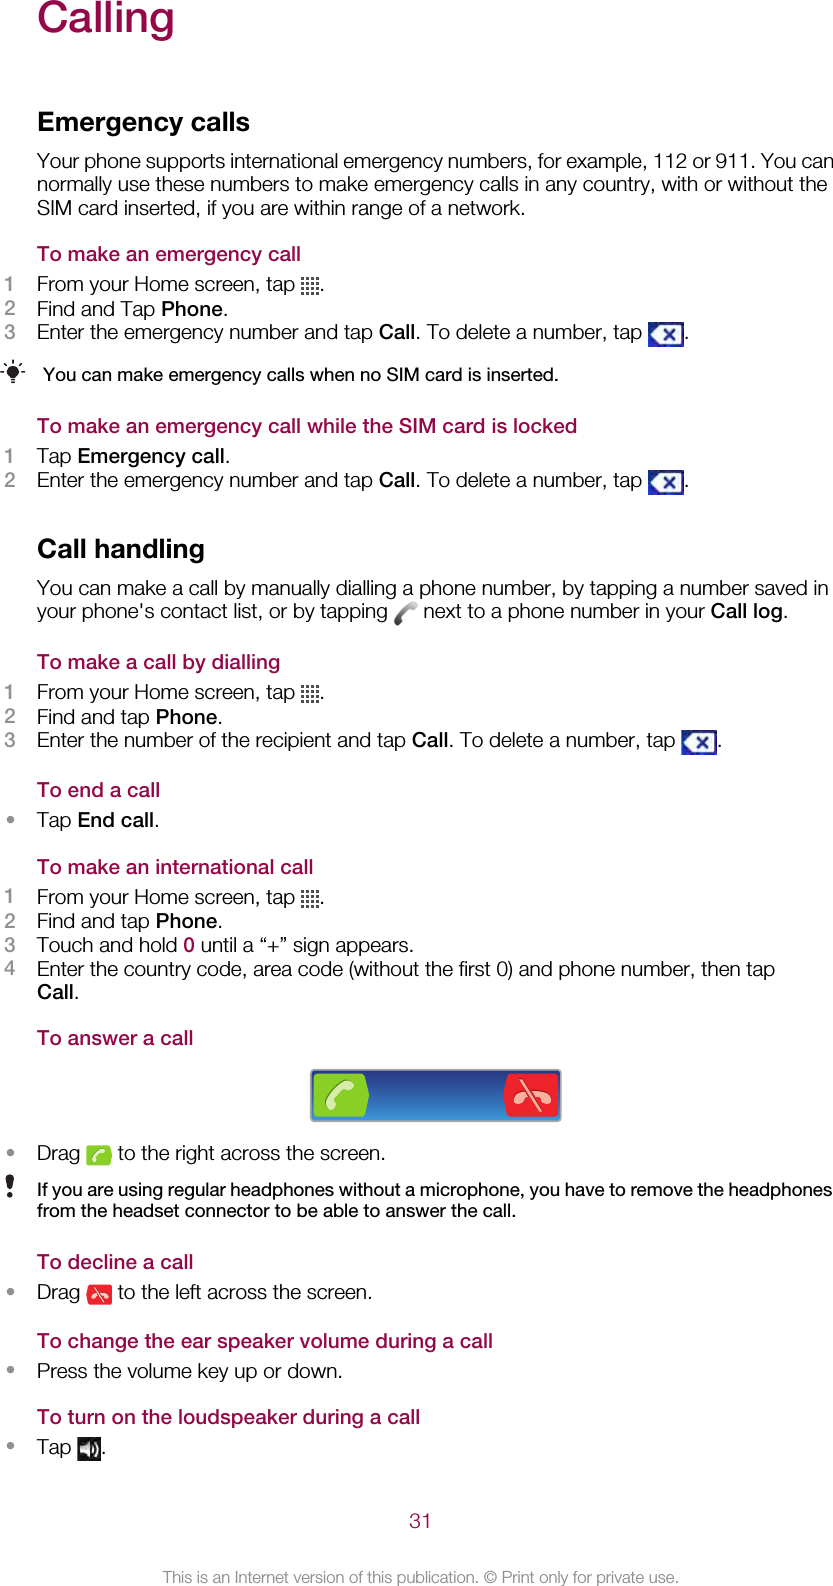 CallingEmergency callsYour phone supports international emergency numbers, for example, 112 or 911. You cannormally use these numbers to make emergency calls in any country, with or without theSIM card inserted, if you are within range of a network.To make an emergency call1From your Home screen, tap  .2Find and Tap Phone.3Enter the emergency number and tap Call. To delete a number, tap  .You can make emergency calls when no SIM card is inserted.To make an emergency call while the SIM card is locked1Tap Emergency call.2Enter the emergency number and tap Call. To delete a number, tap  .Call handlingYou can make a call by manually dialling a phone number, by tapping a number saved inyour phone&apos;s contact list, or by tapping   next to a phone number in your Call log.To make a call by dialling1From your Home screen, tap  .2Find and tap Phone.3Enter the number of the recipient and tap Call. To delete a number, tap  .To end a call•Tap End call.To make an international call1From your Home screen, tap  .2Find and tap Phone.3Touch and hold 0 until a “+” sign appears.4Enter the country code, area code (without the first 0) and phone number, then tapCall.To answer a call•Drag   to the right across the screen.If you are using regular headphones without a microphone, you have to remove the headphonesfrom the headset connector to be able to answer the call.To decline a call•Drag   to the left across the screen.To change the ear speaker volume during a call•Press the volume key up or down.To turn on the loudspeaker during a call•Tap  .31This is an Internet version of this publication. © Print only for private use.